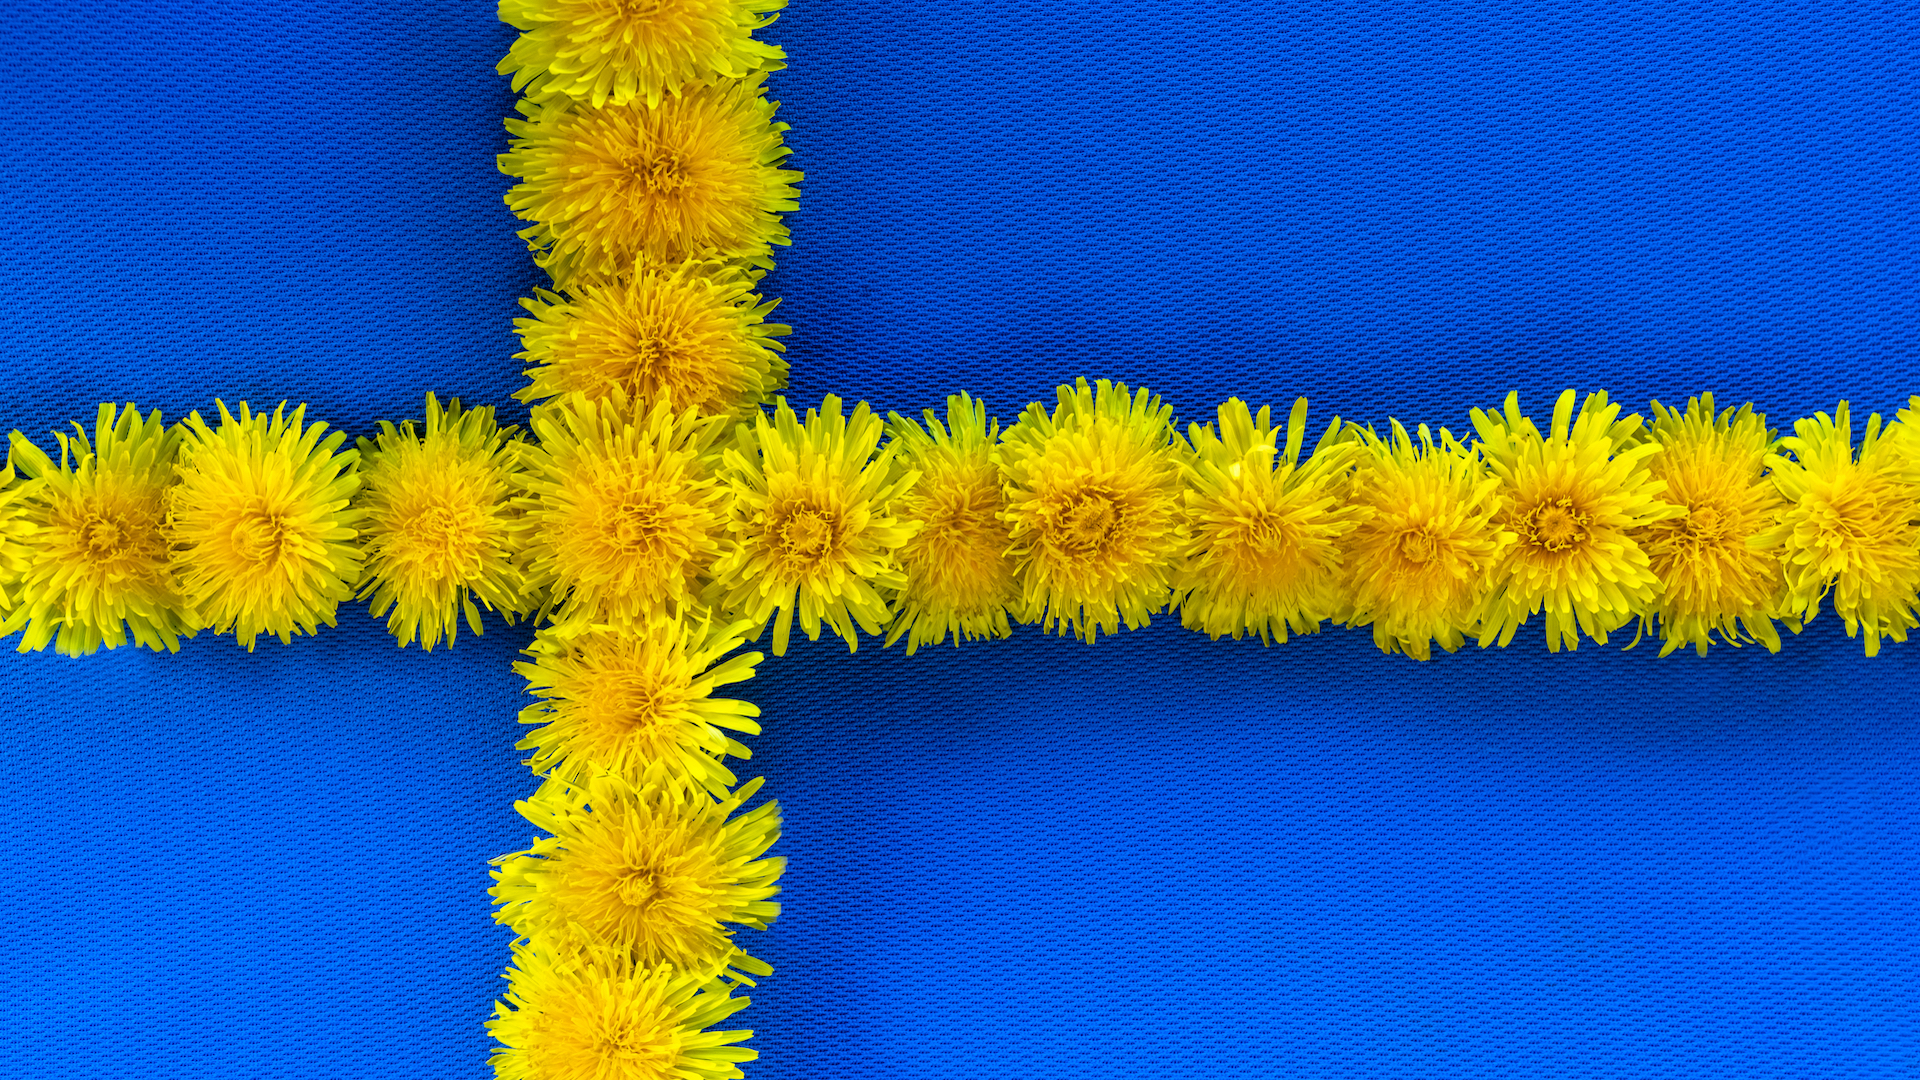 A Swedish flag made out of dandelions